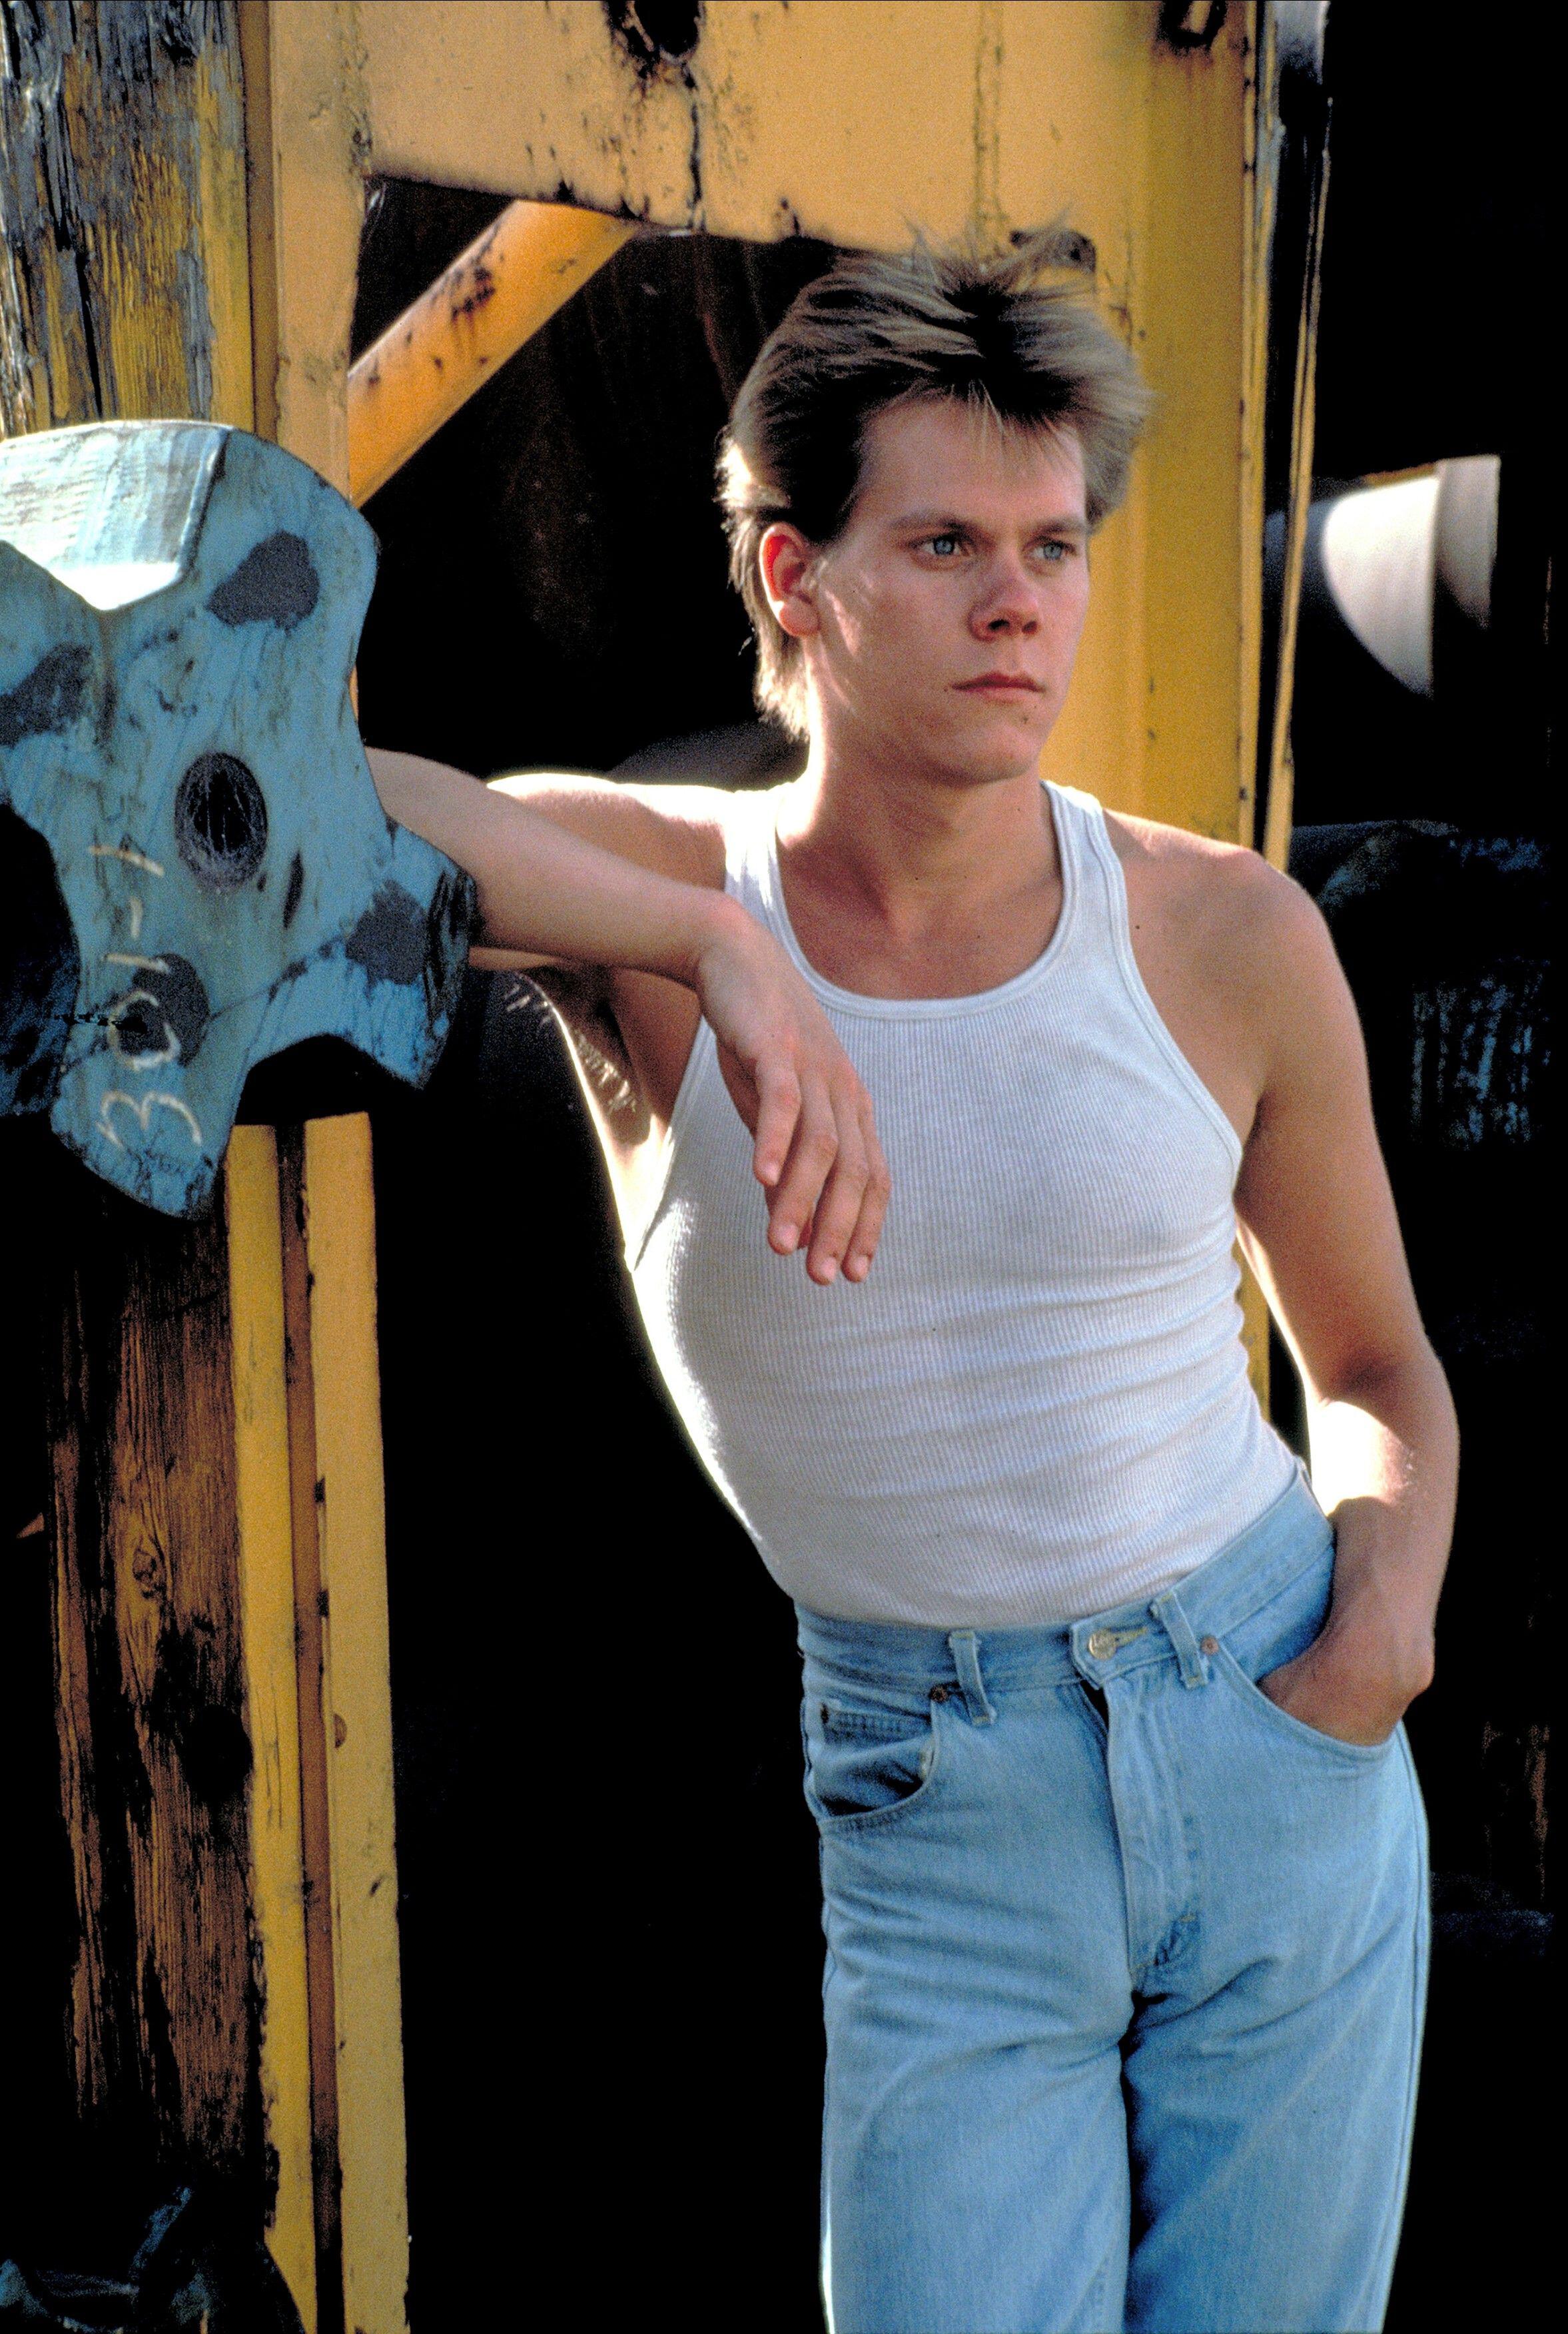 Kevin played Ren McCormack in Footloose 40 years ago.